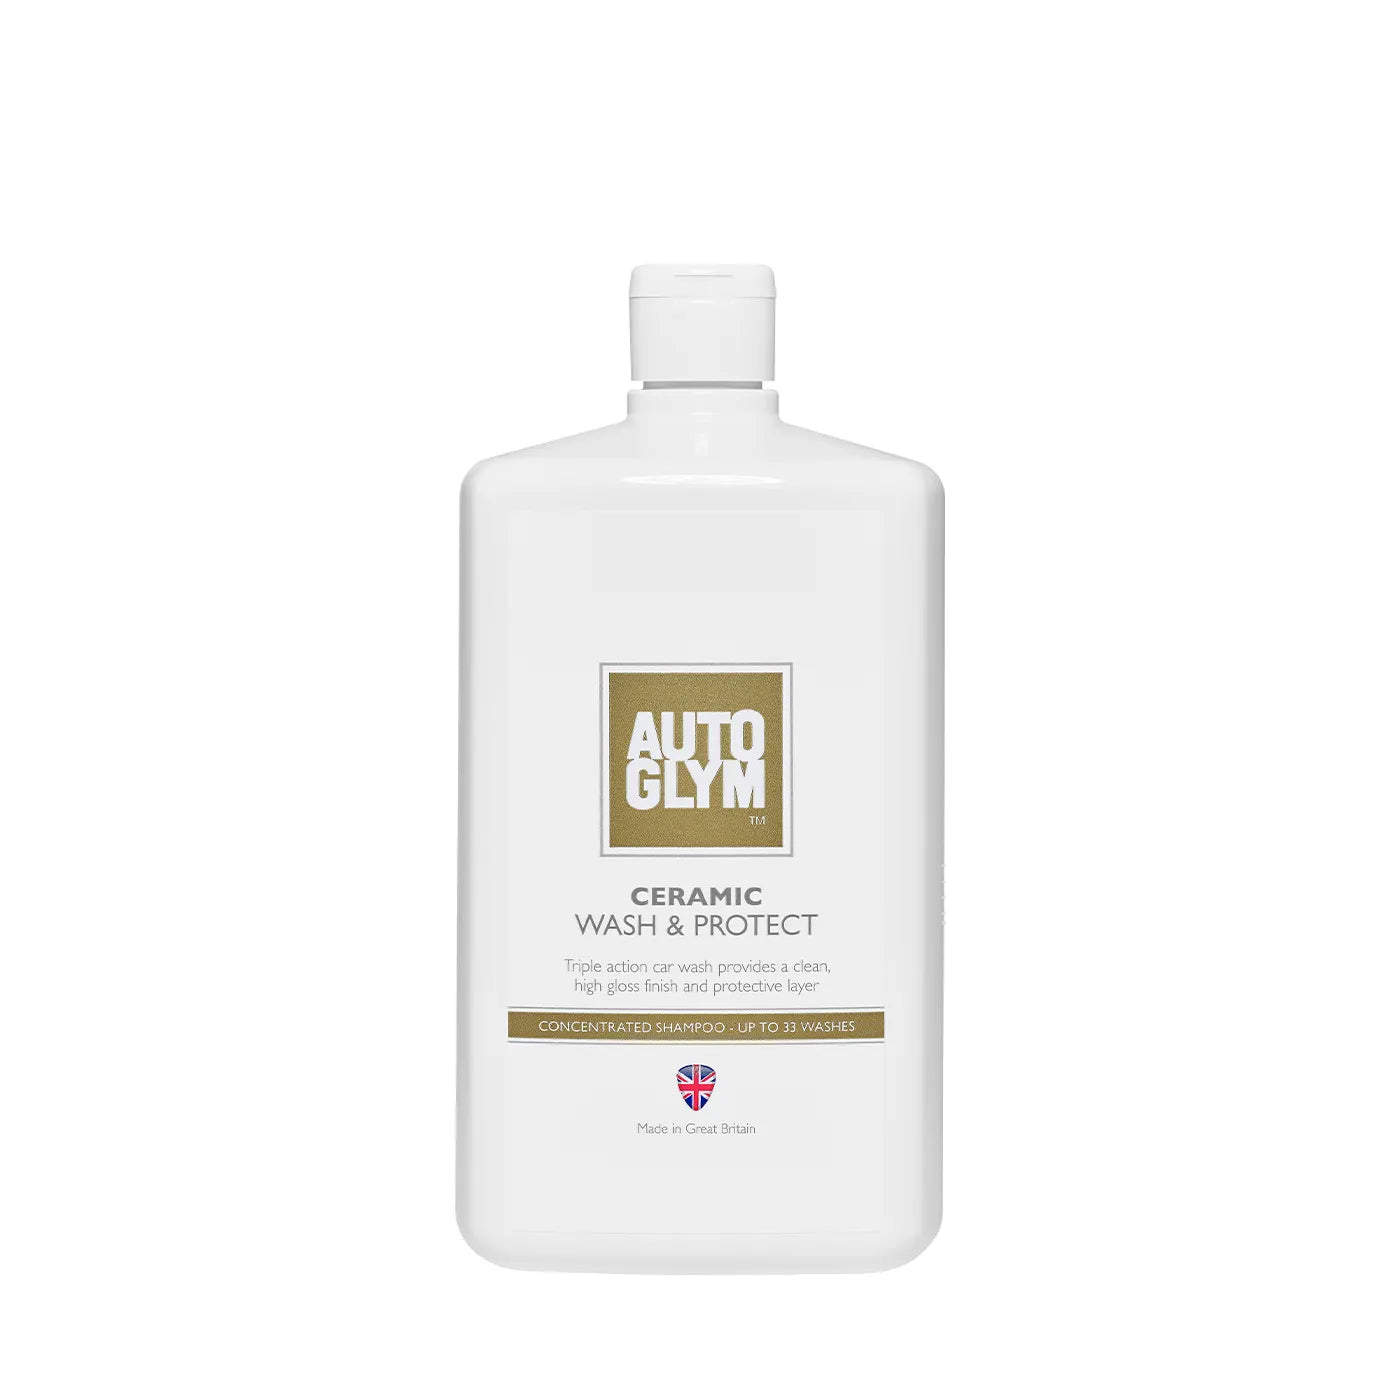 Autoglym Ceramic Shampoo 1L. Autoglym Ireland. A shampoo with triple action benefits. Our Ceramic Wash & Protect delivers a deep clean, and leaves a hydrophobic protective layer, along with a smooth high gloss finish.